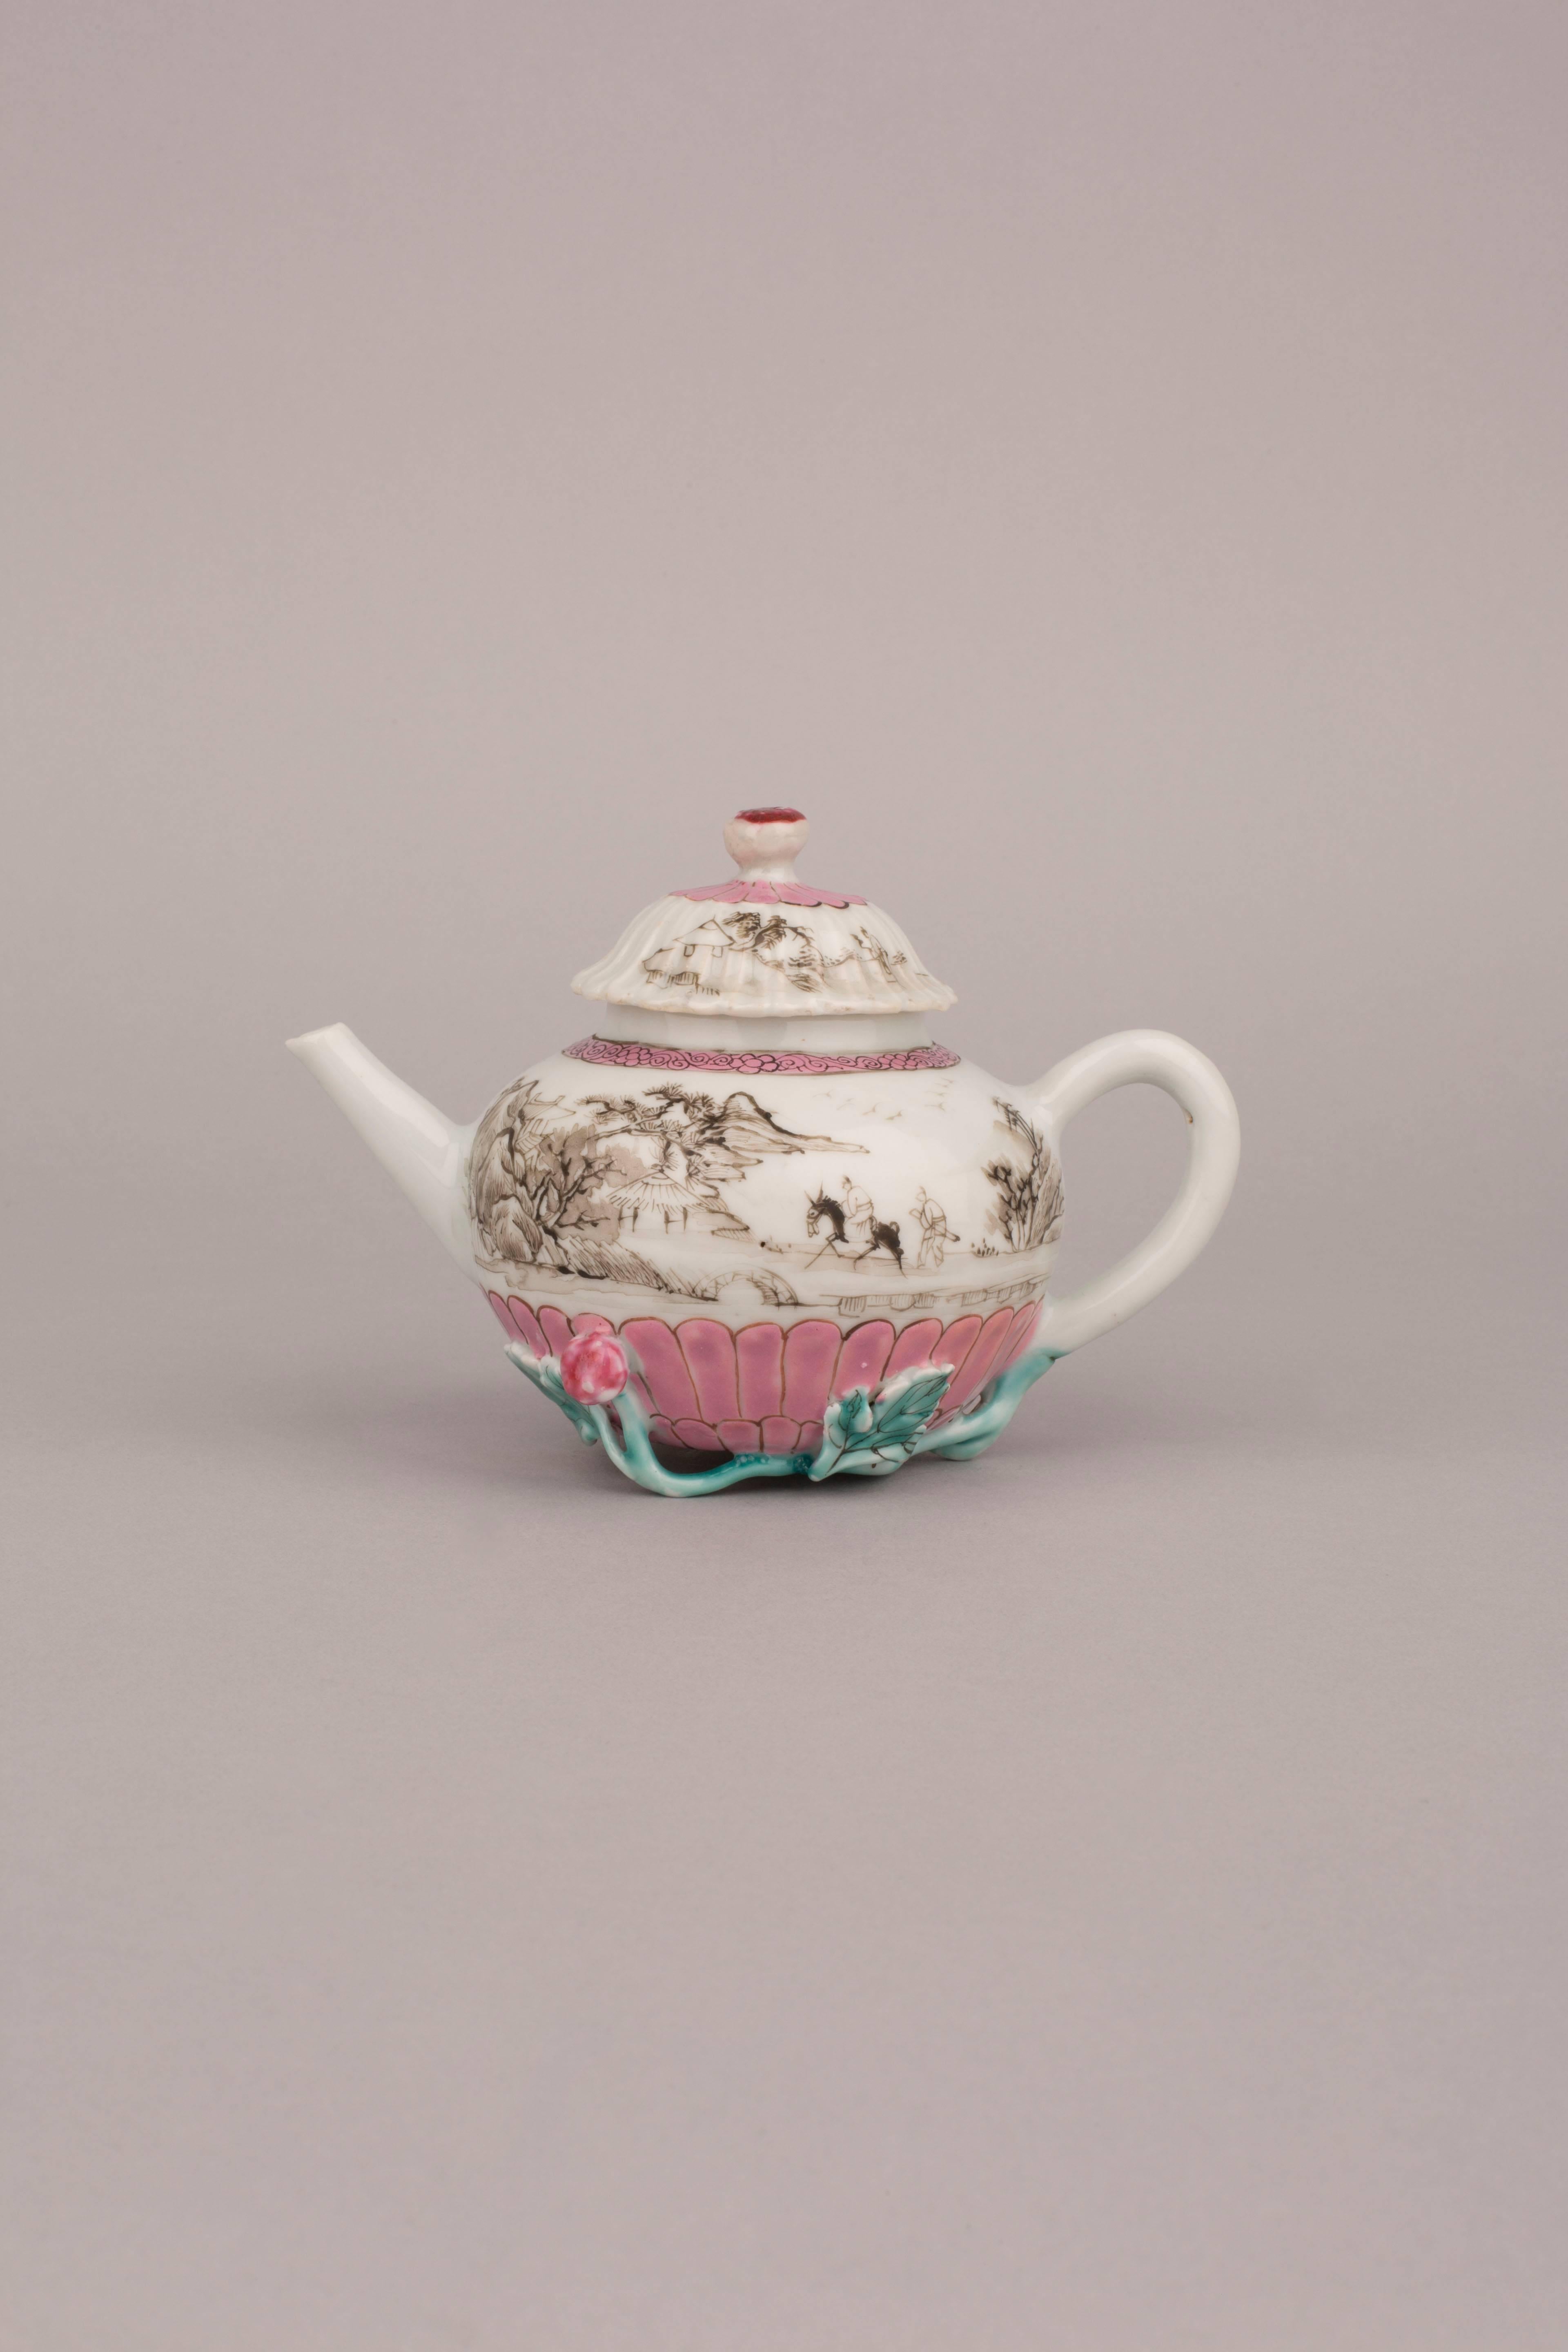 A Chinese famille rose export porcelain teapot and cover, the bottom half of the teapot moulded in the form of a chrysanthemum with leaves, buds and branches forming the foot, the body painted ingrisaille with a man riding a donkey and attendant in